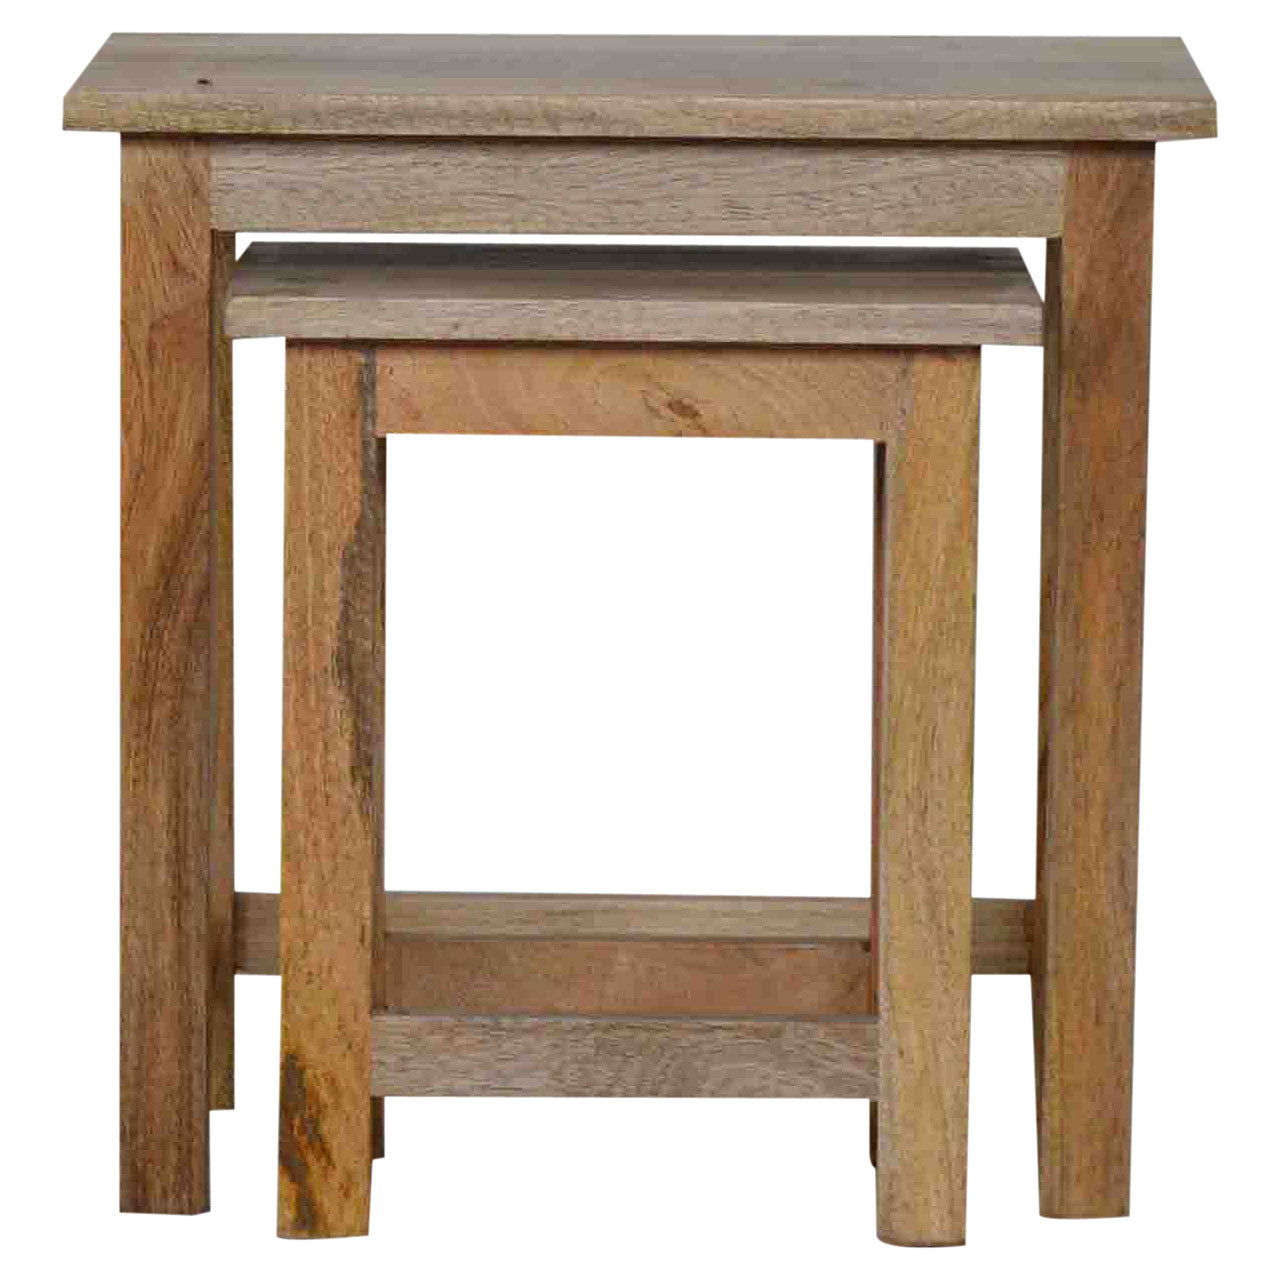 View Country Style Stool Set of 2 information